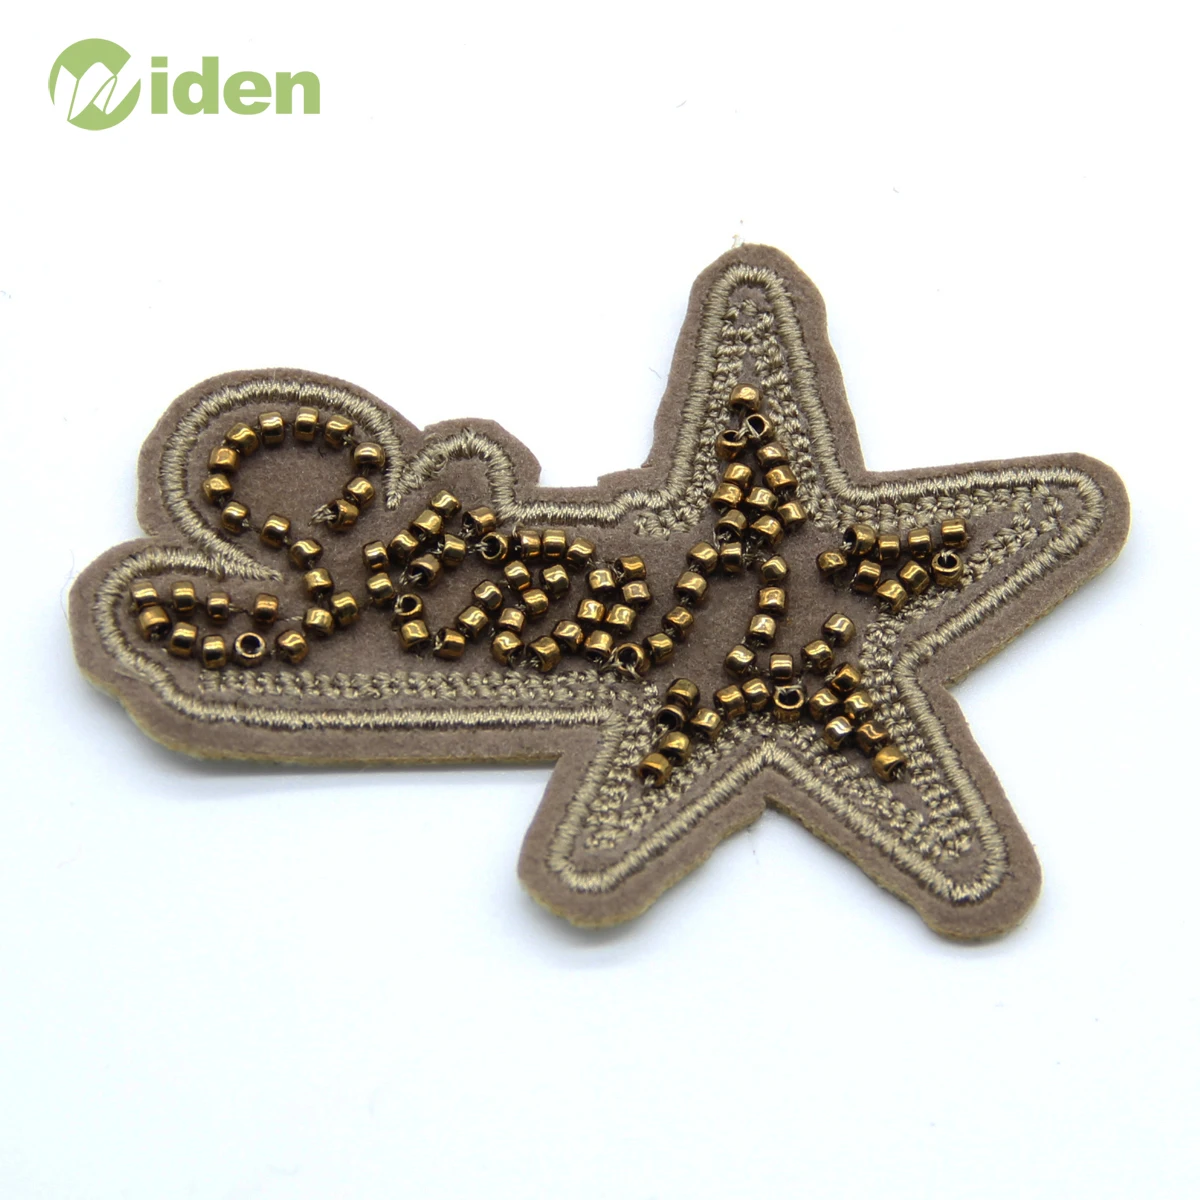 Embroidered Iron on Patch Applique Lovely 8*6CM Star Beads Embroidery Patch